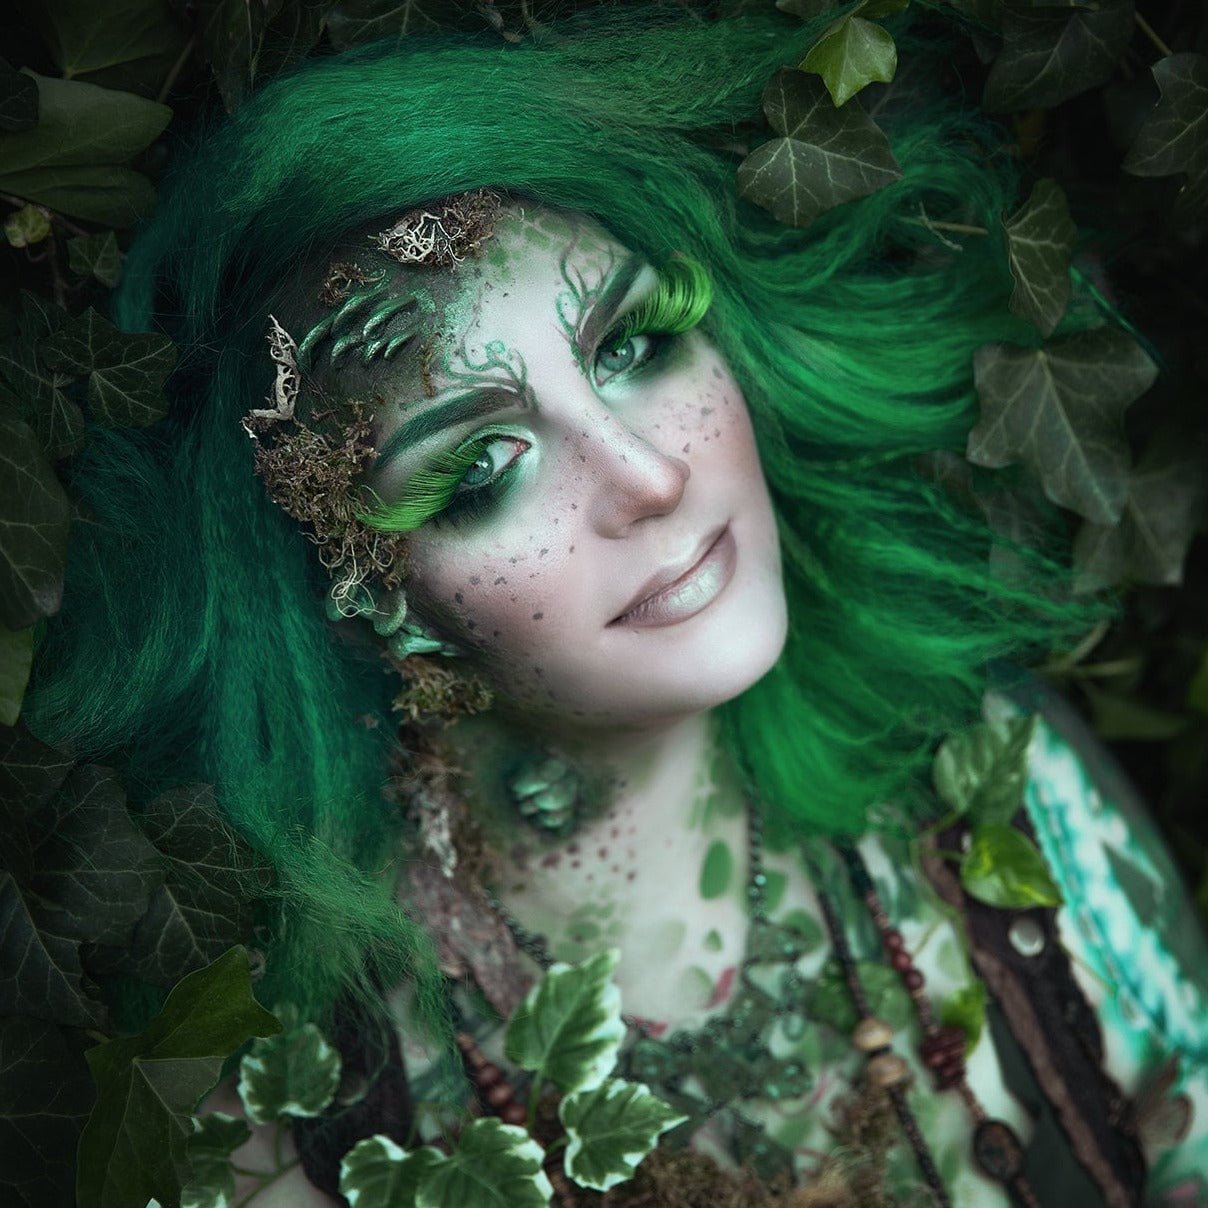 Woman with green hair wearing fungi prosthetics on her face